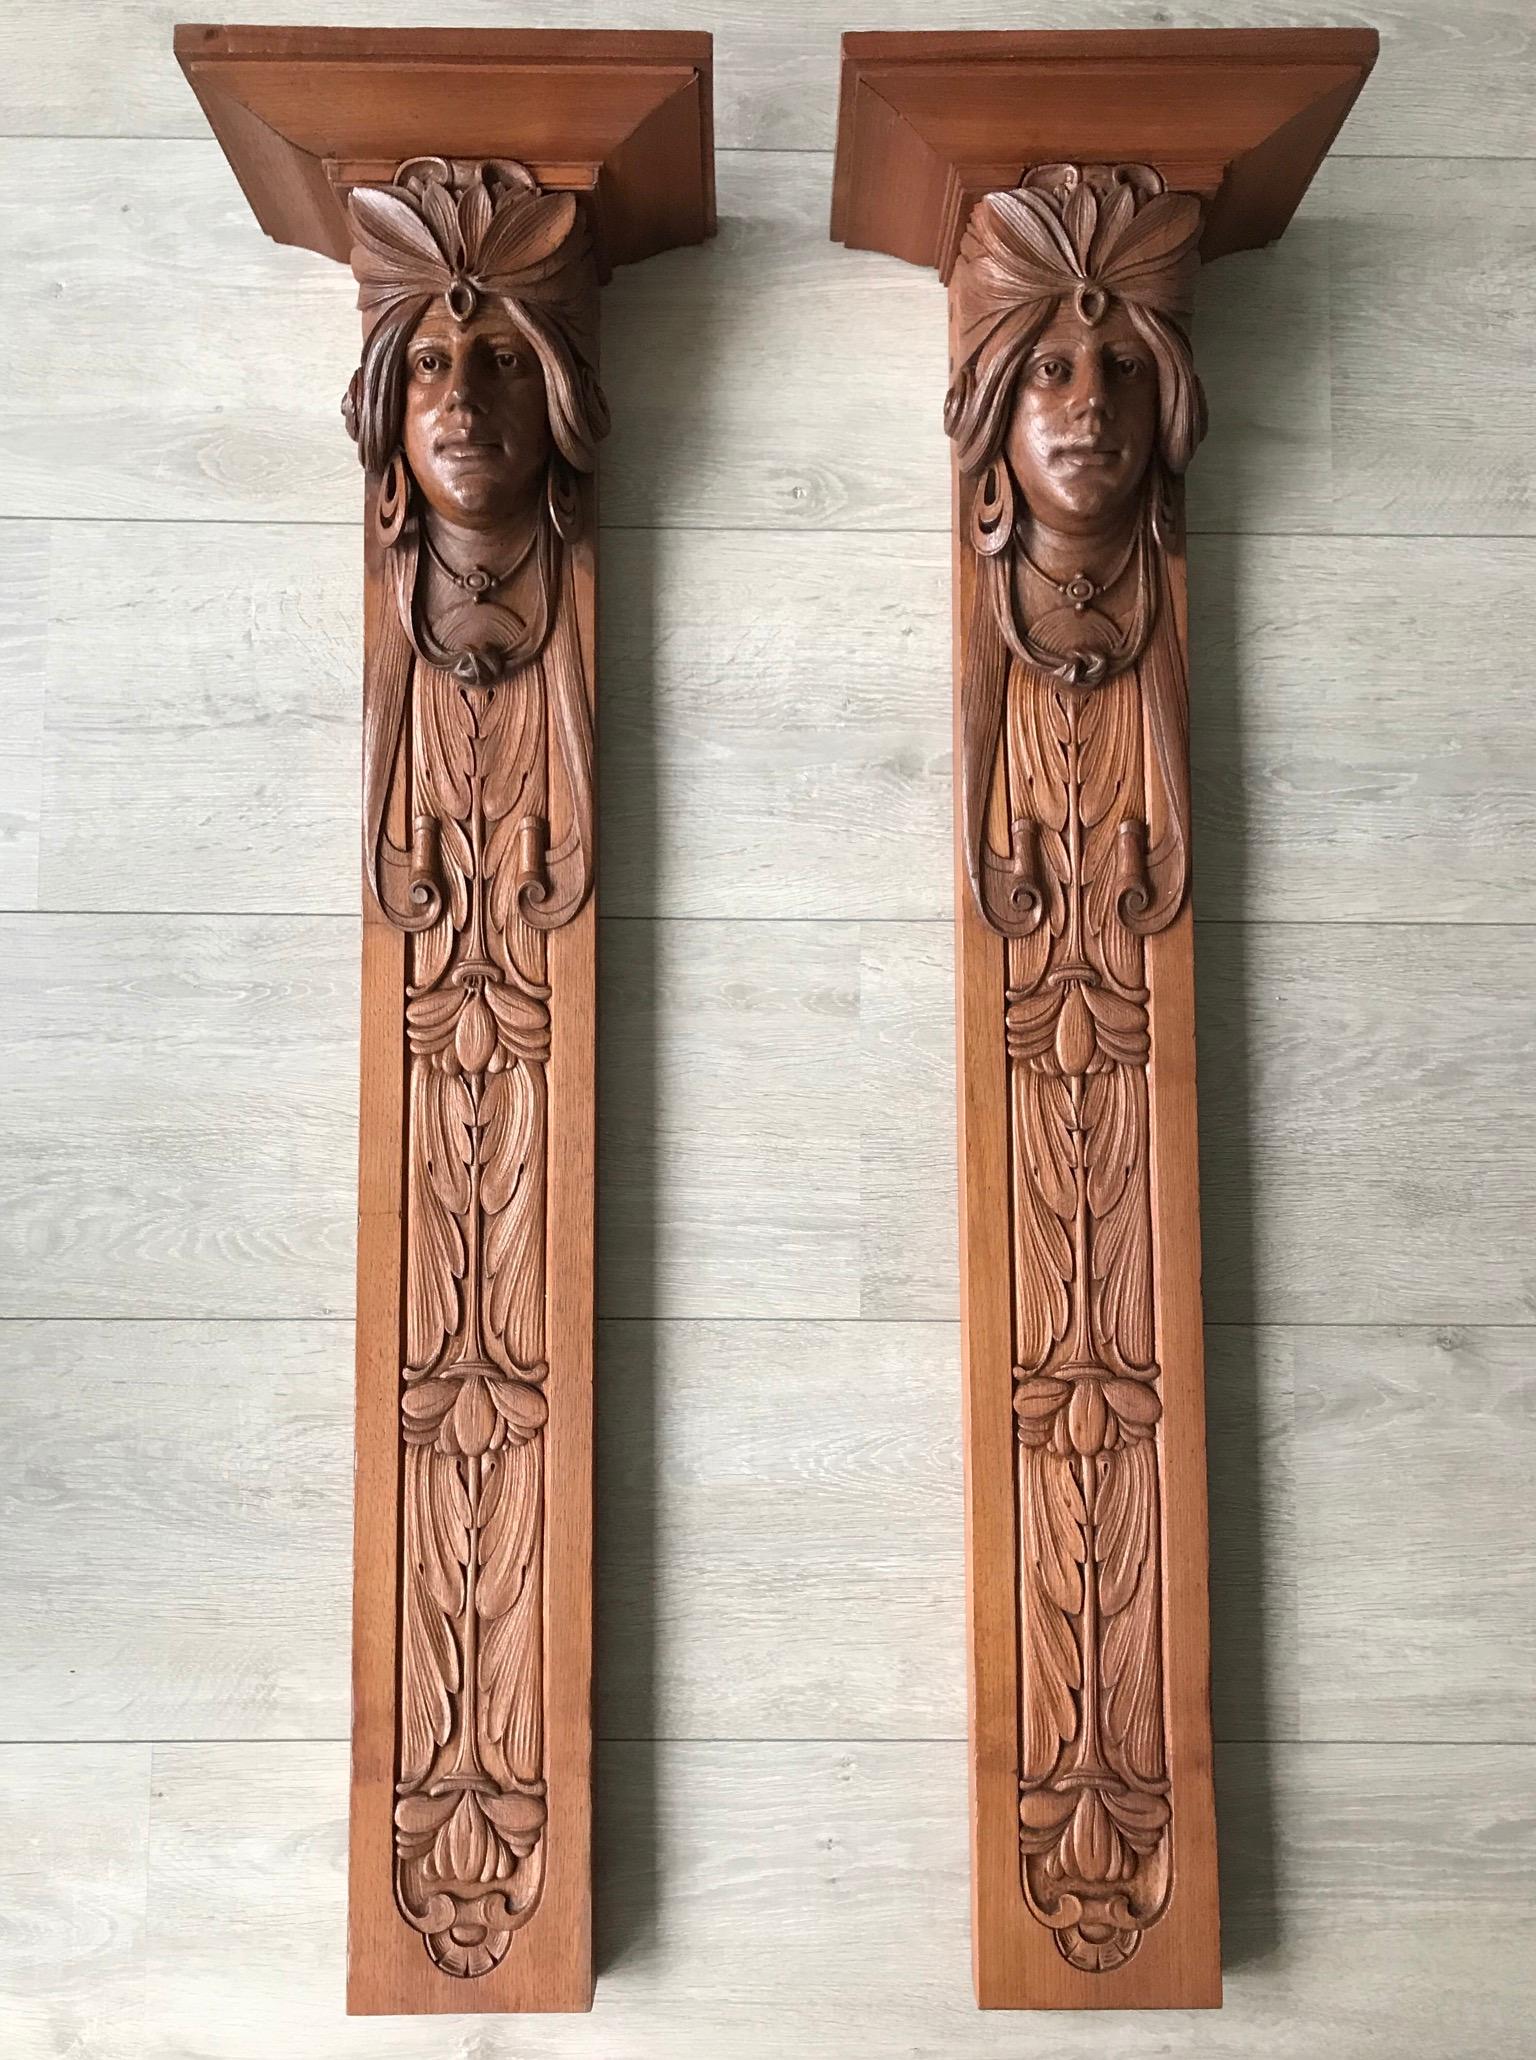 Large and Amazing Pair of Art Nouveau Maharaja Sculpture Wall Brackets / Shelves For Sale 10